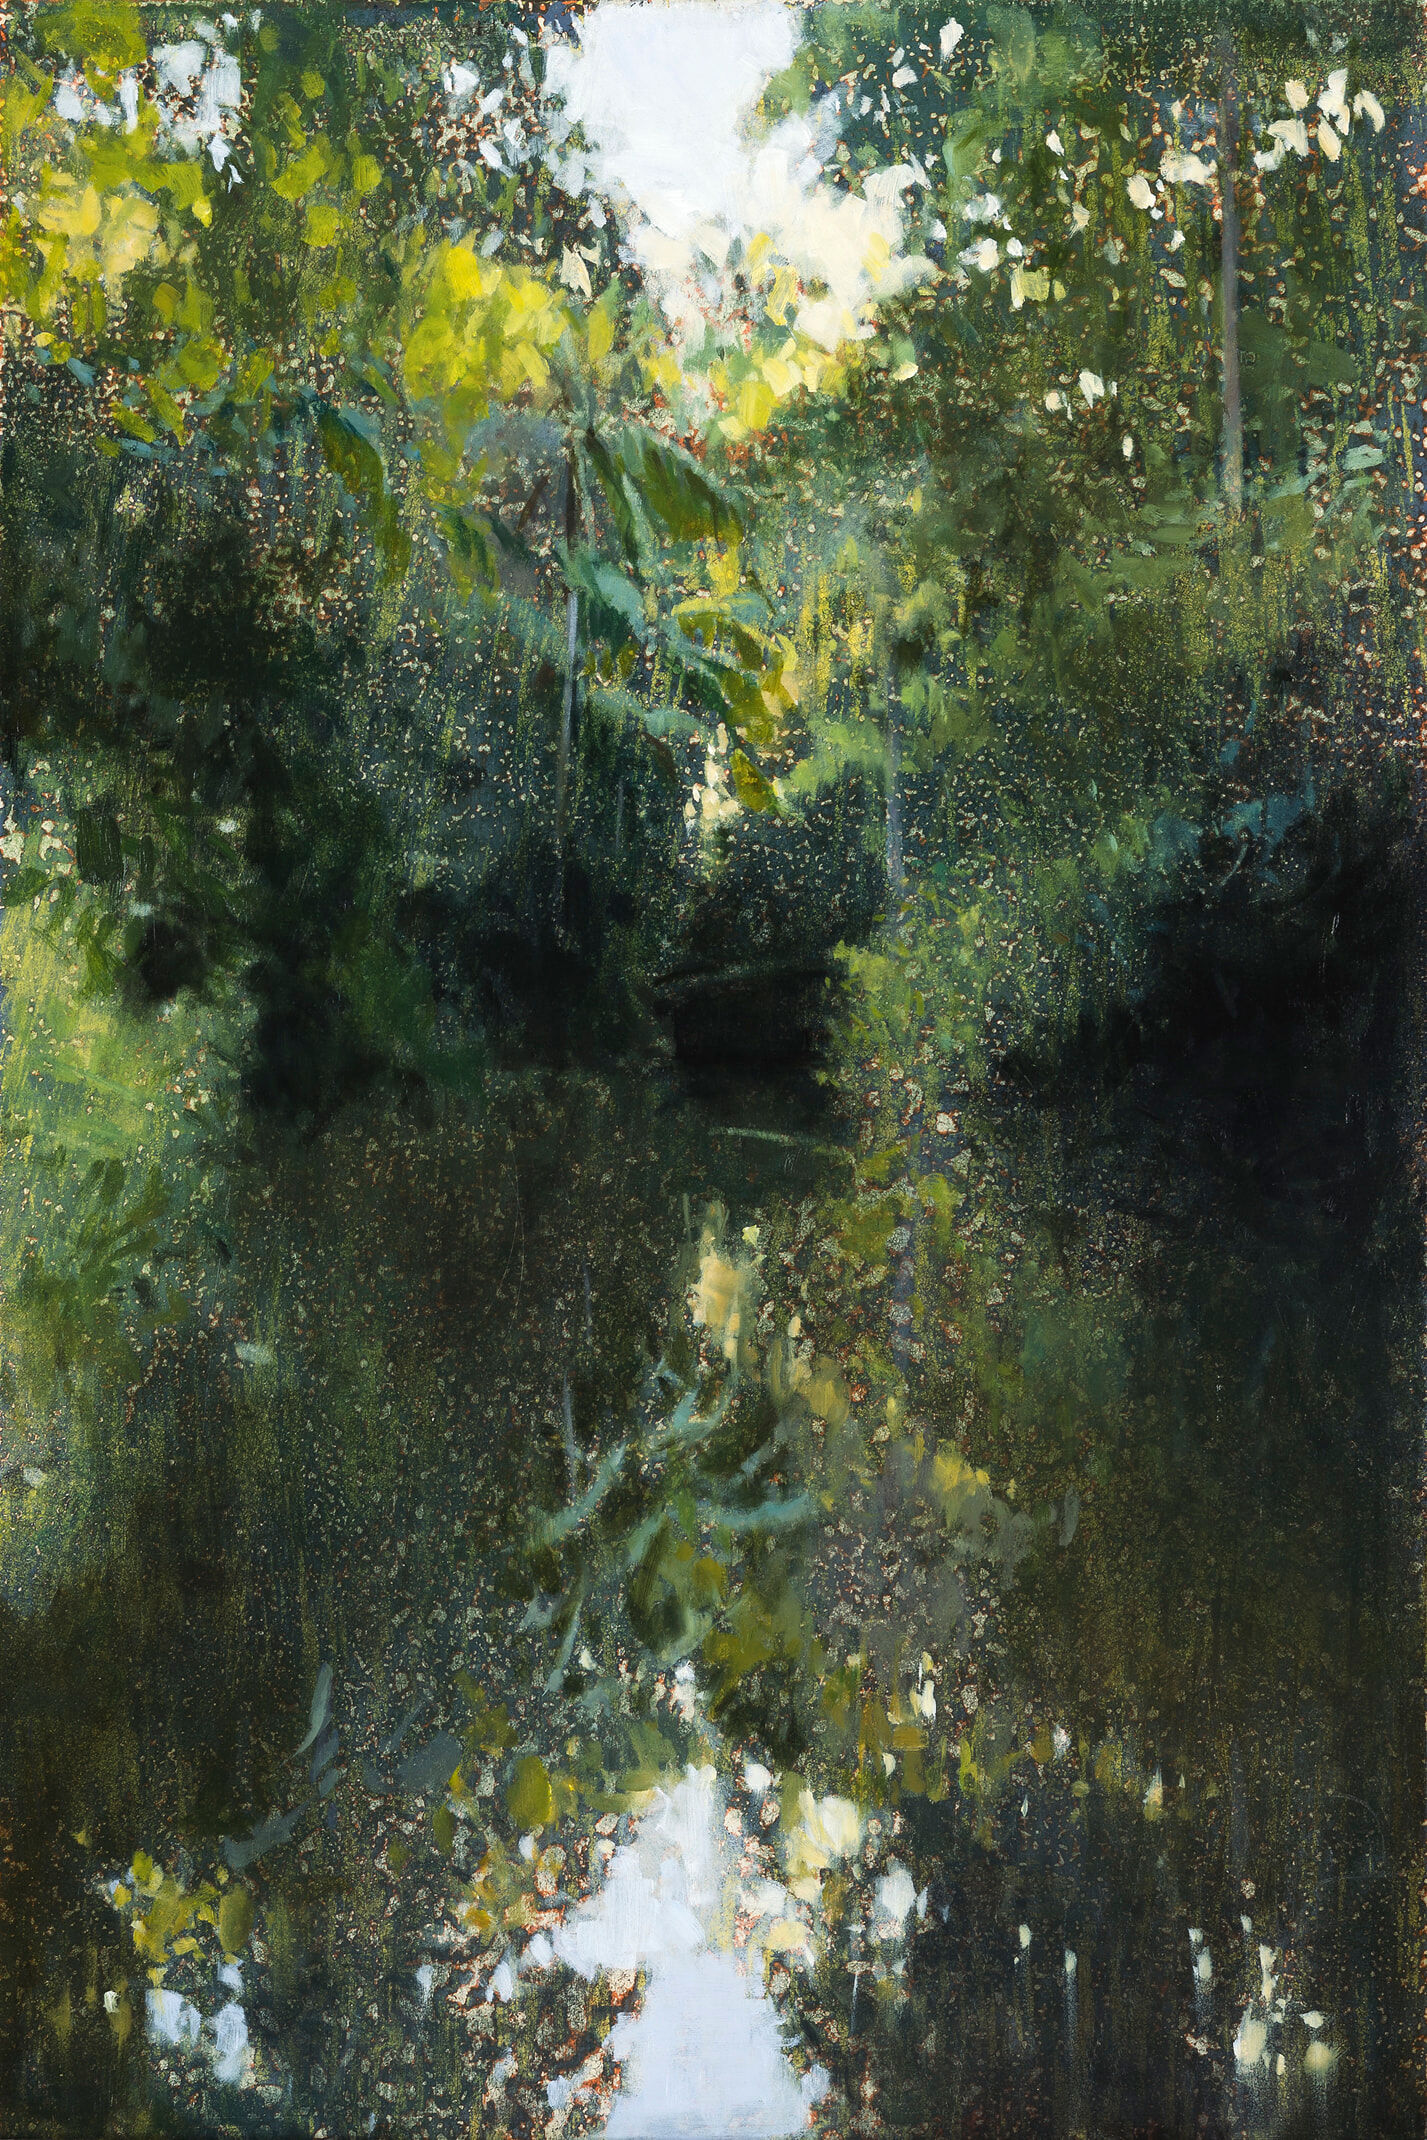 AJ Taylor, Palms and Reflection, 2020, oil on board, 46 x 30.5 cm